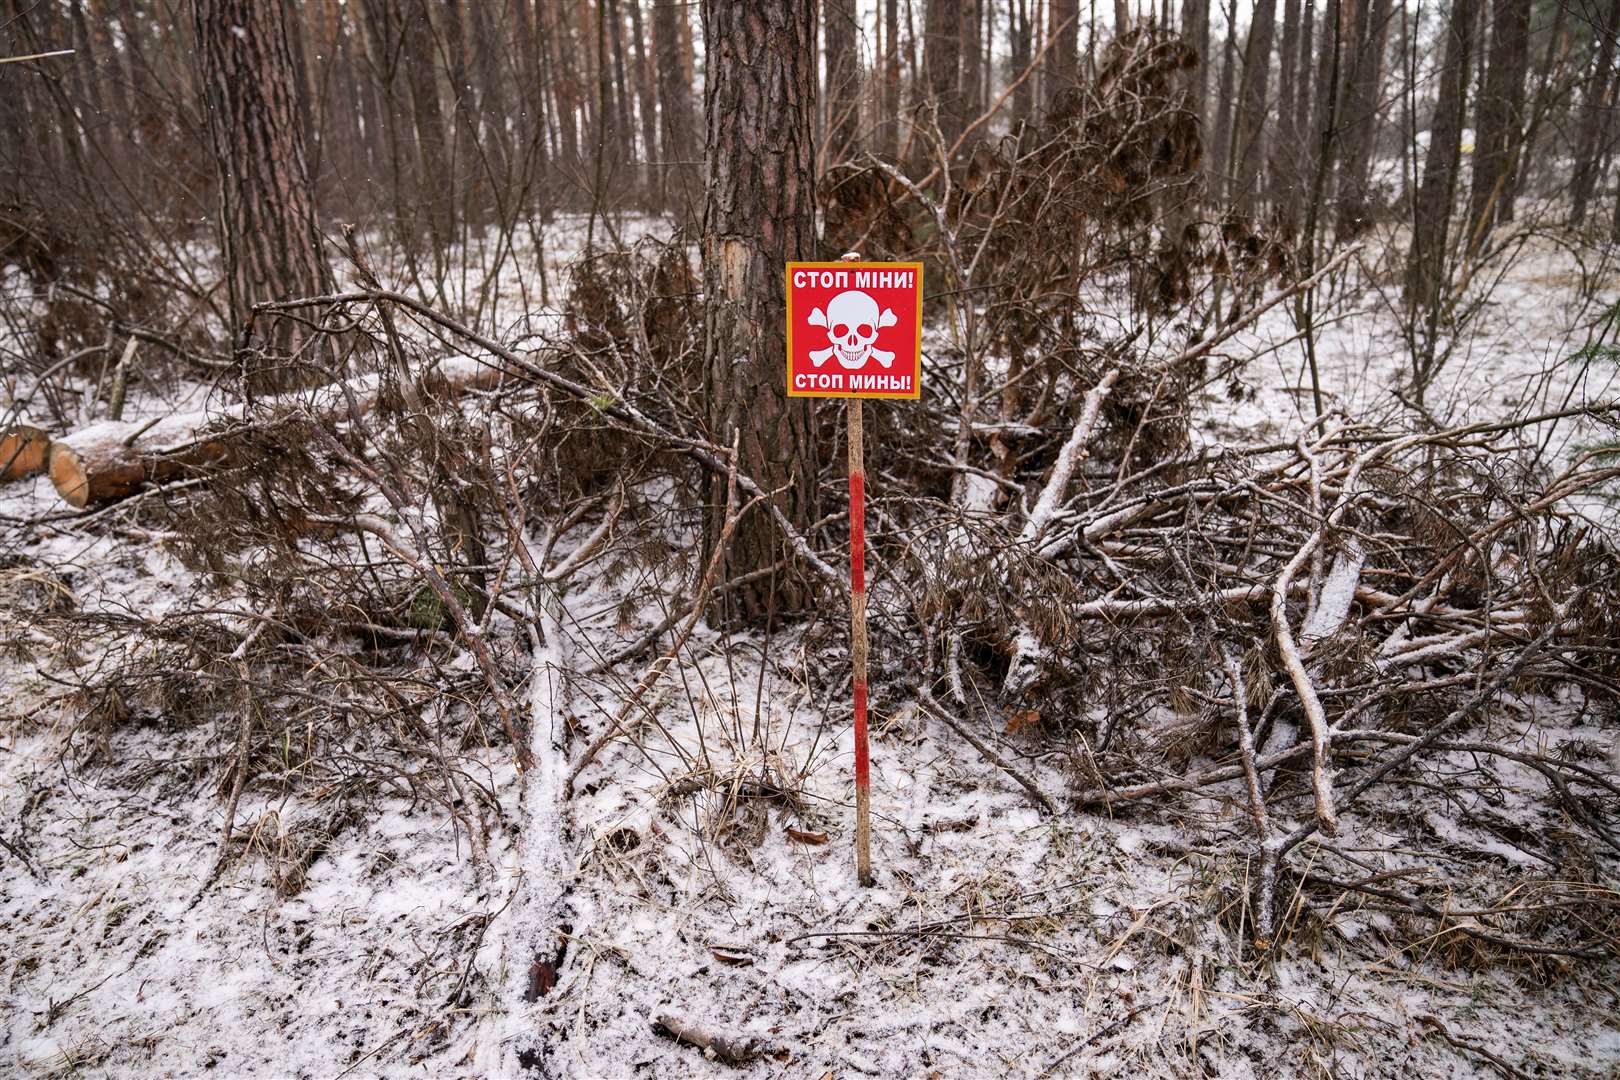 Land mine boundary markers in Berezivka where the Halo Trust will be surveying and clearing of potential hazardous mines and contaminated materials (Aaron Chown/PA)